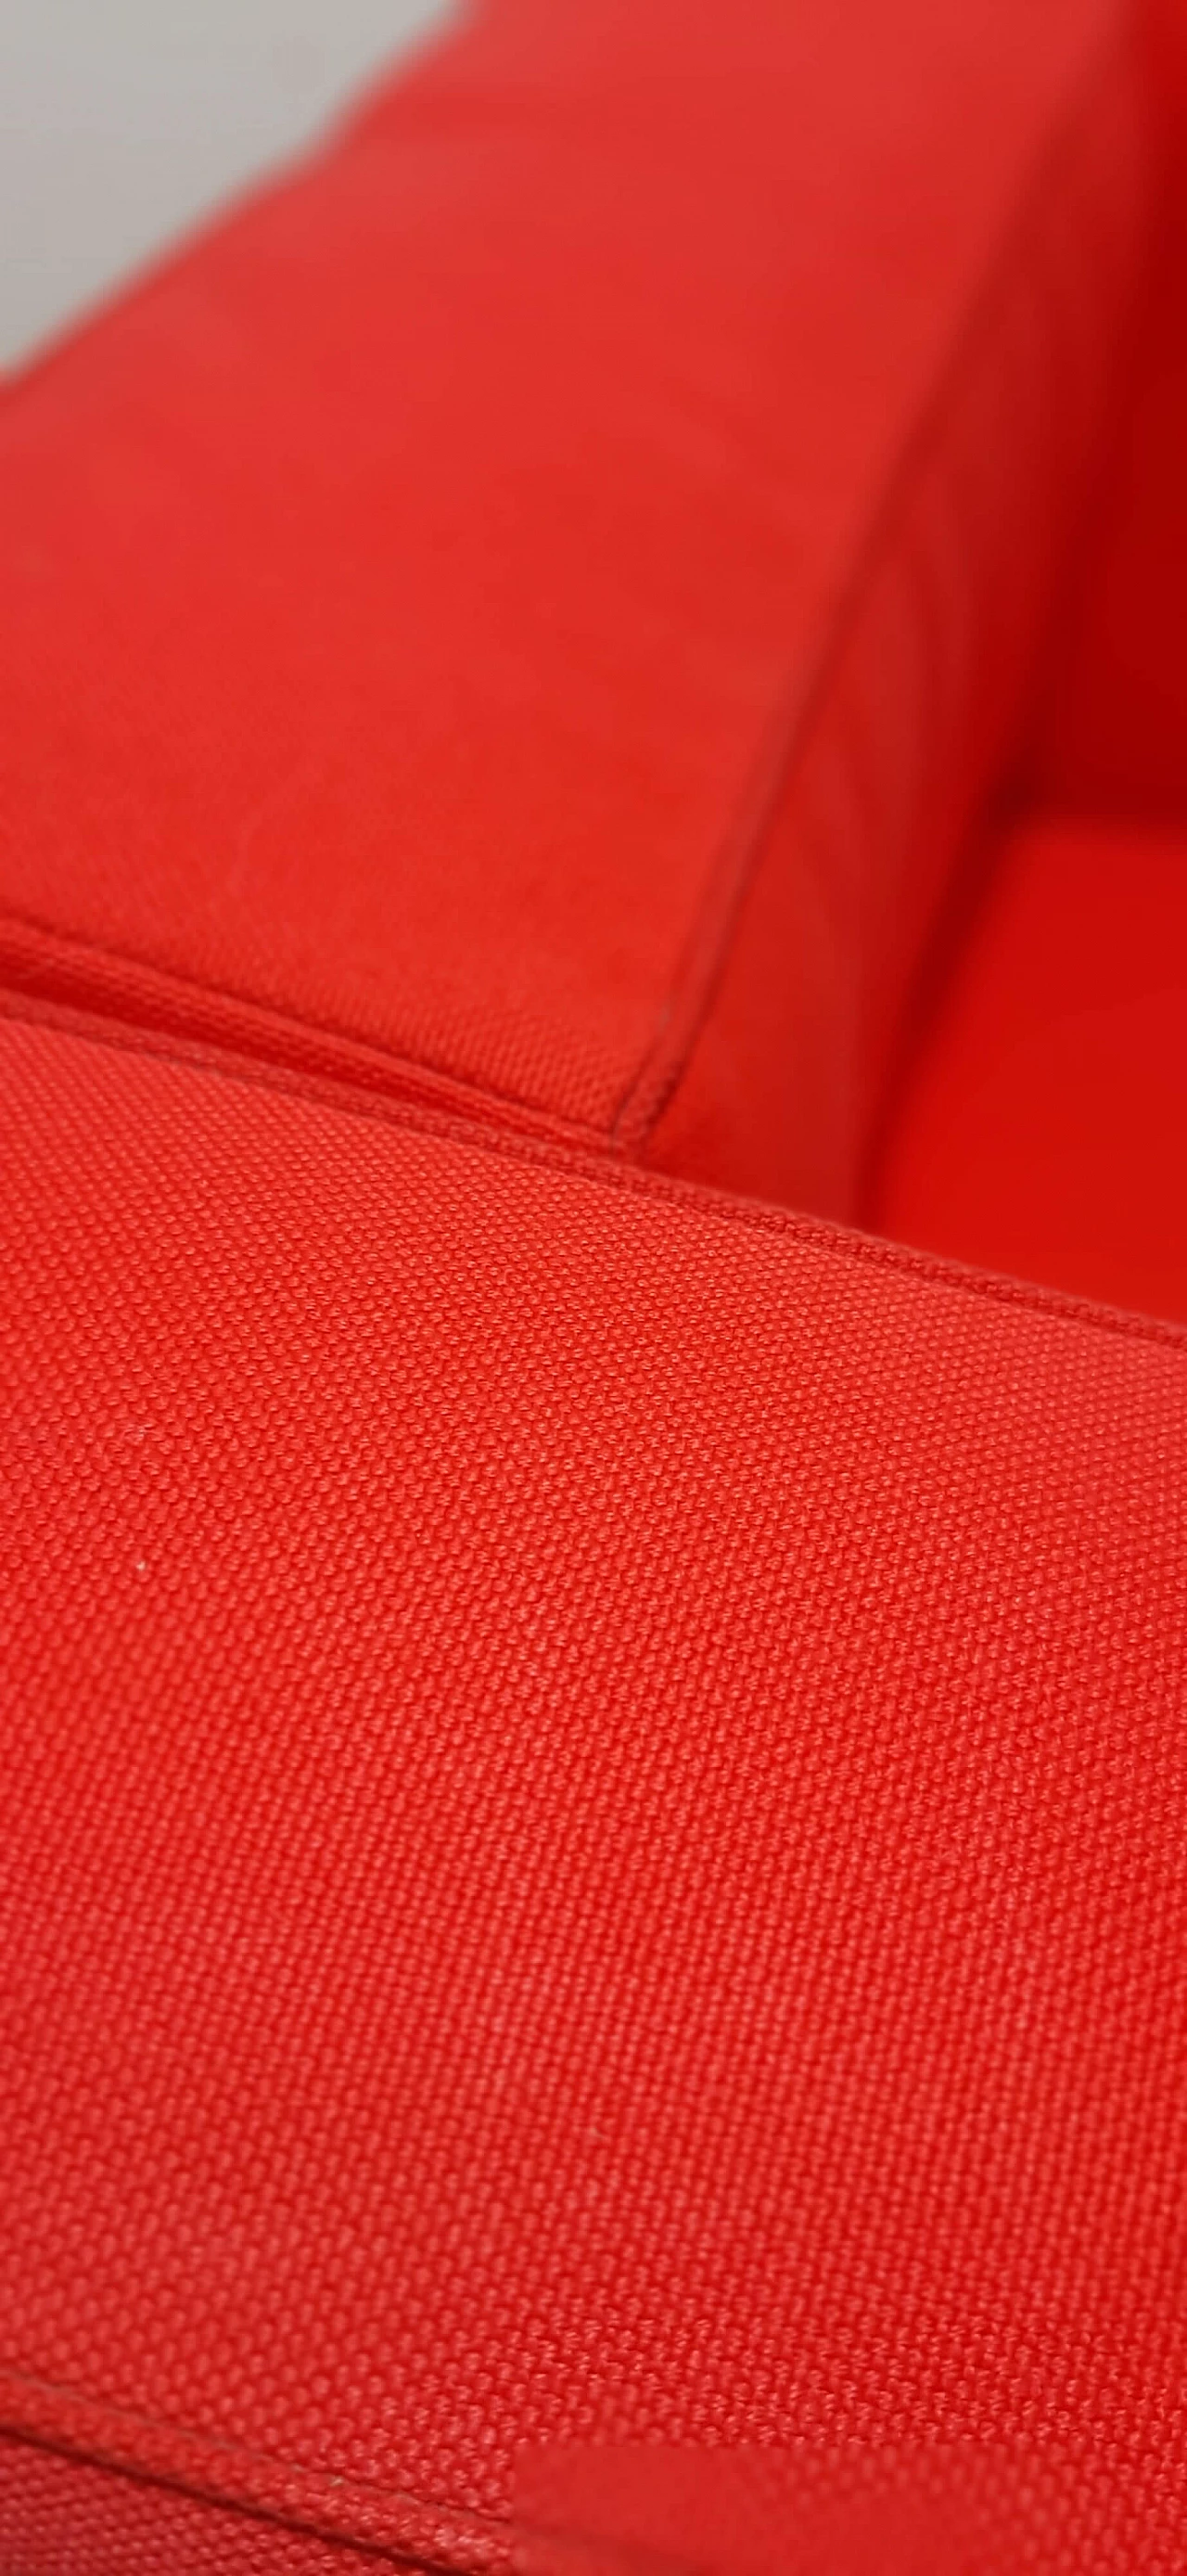 LC 2 armchair in red cotton by Le Corbusier, P. Jeanneret, C. Perriand for Alivar, 1980s 65